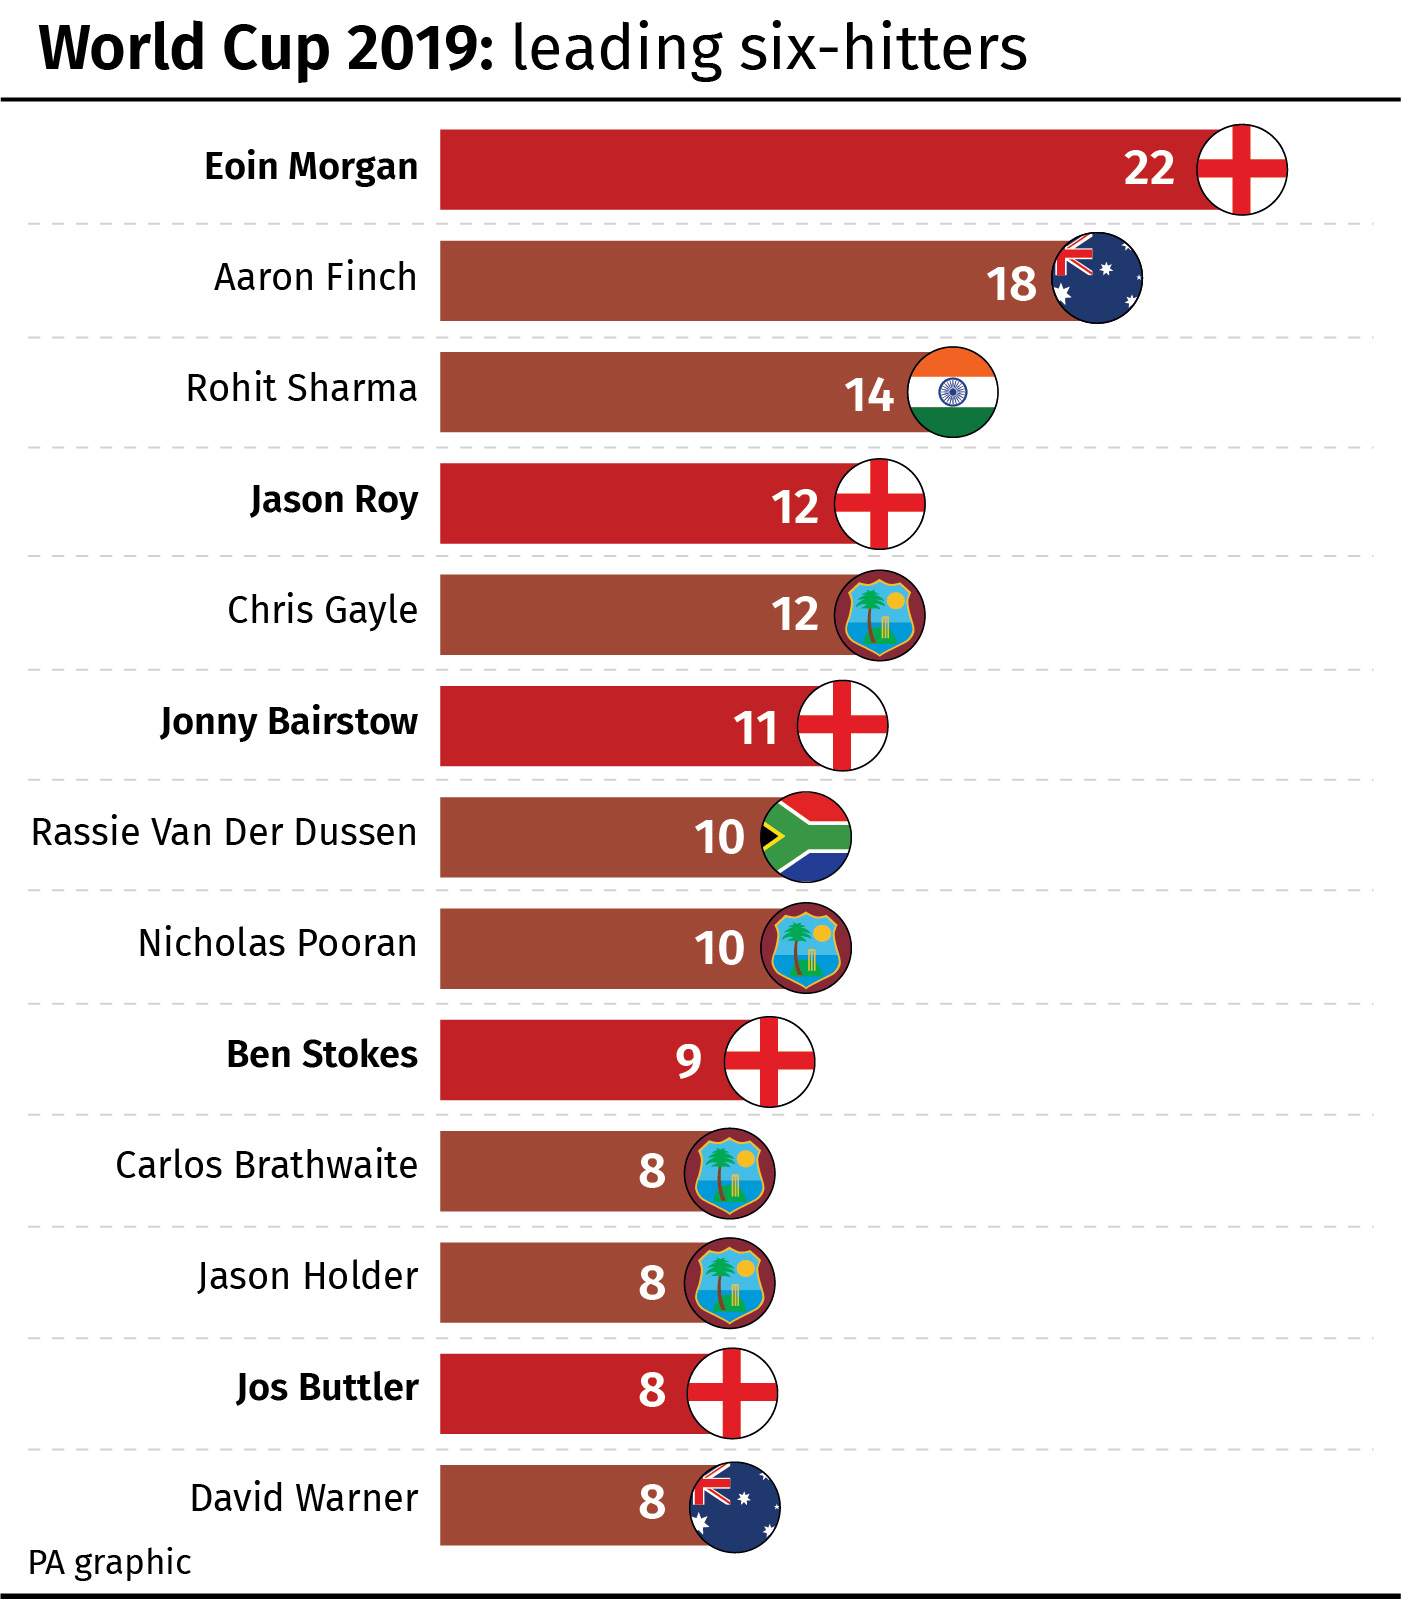 World Cup 2019: most sixes